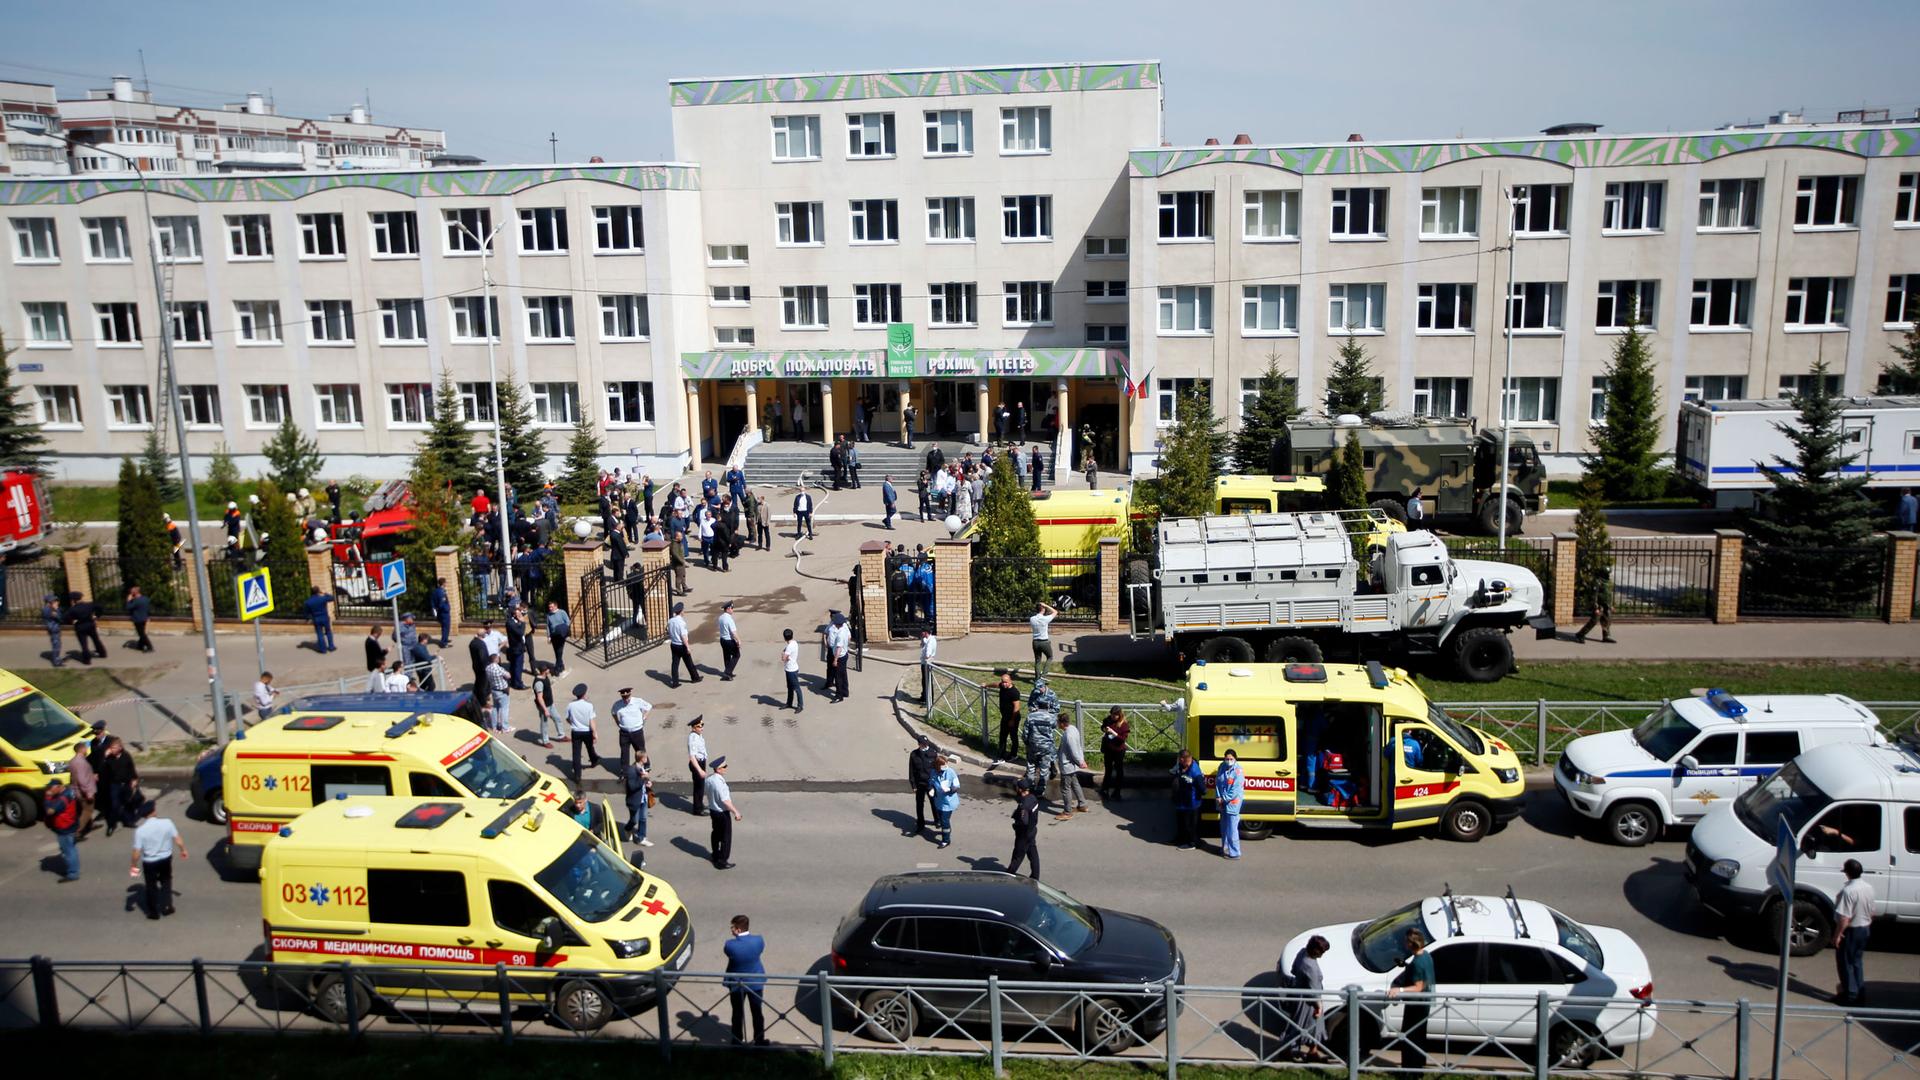 Several yellow ambulances and white police cars and are shown in the street outside of a three storey school building.